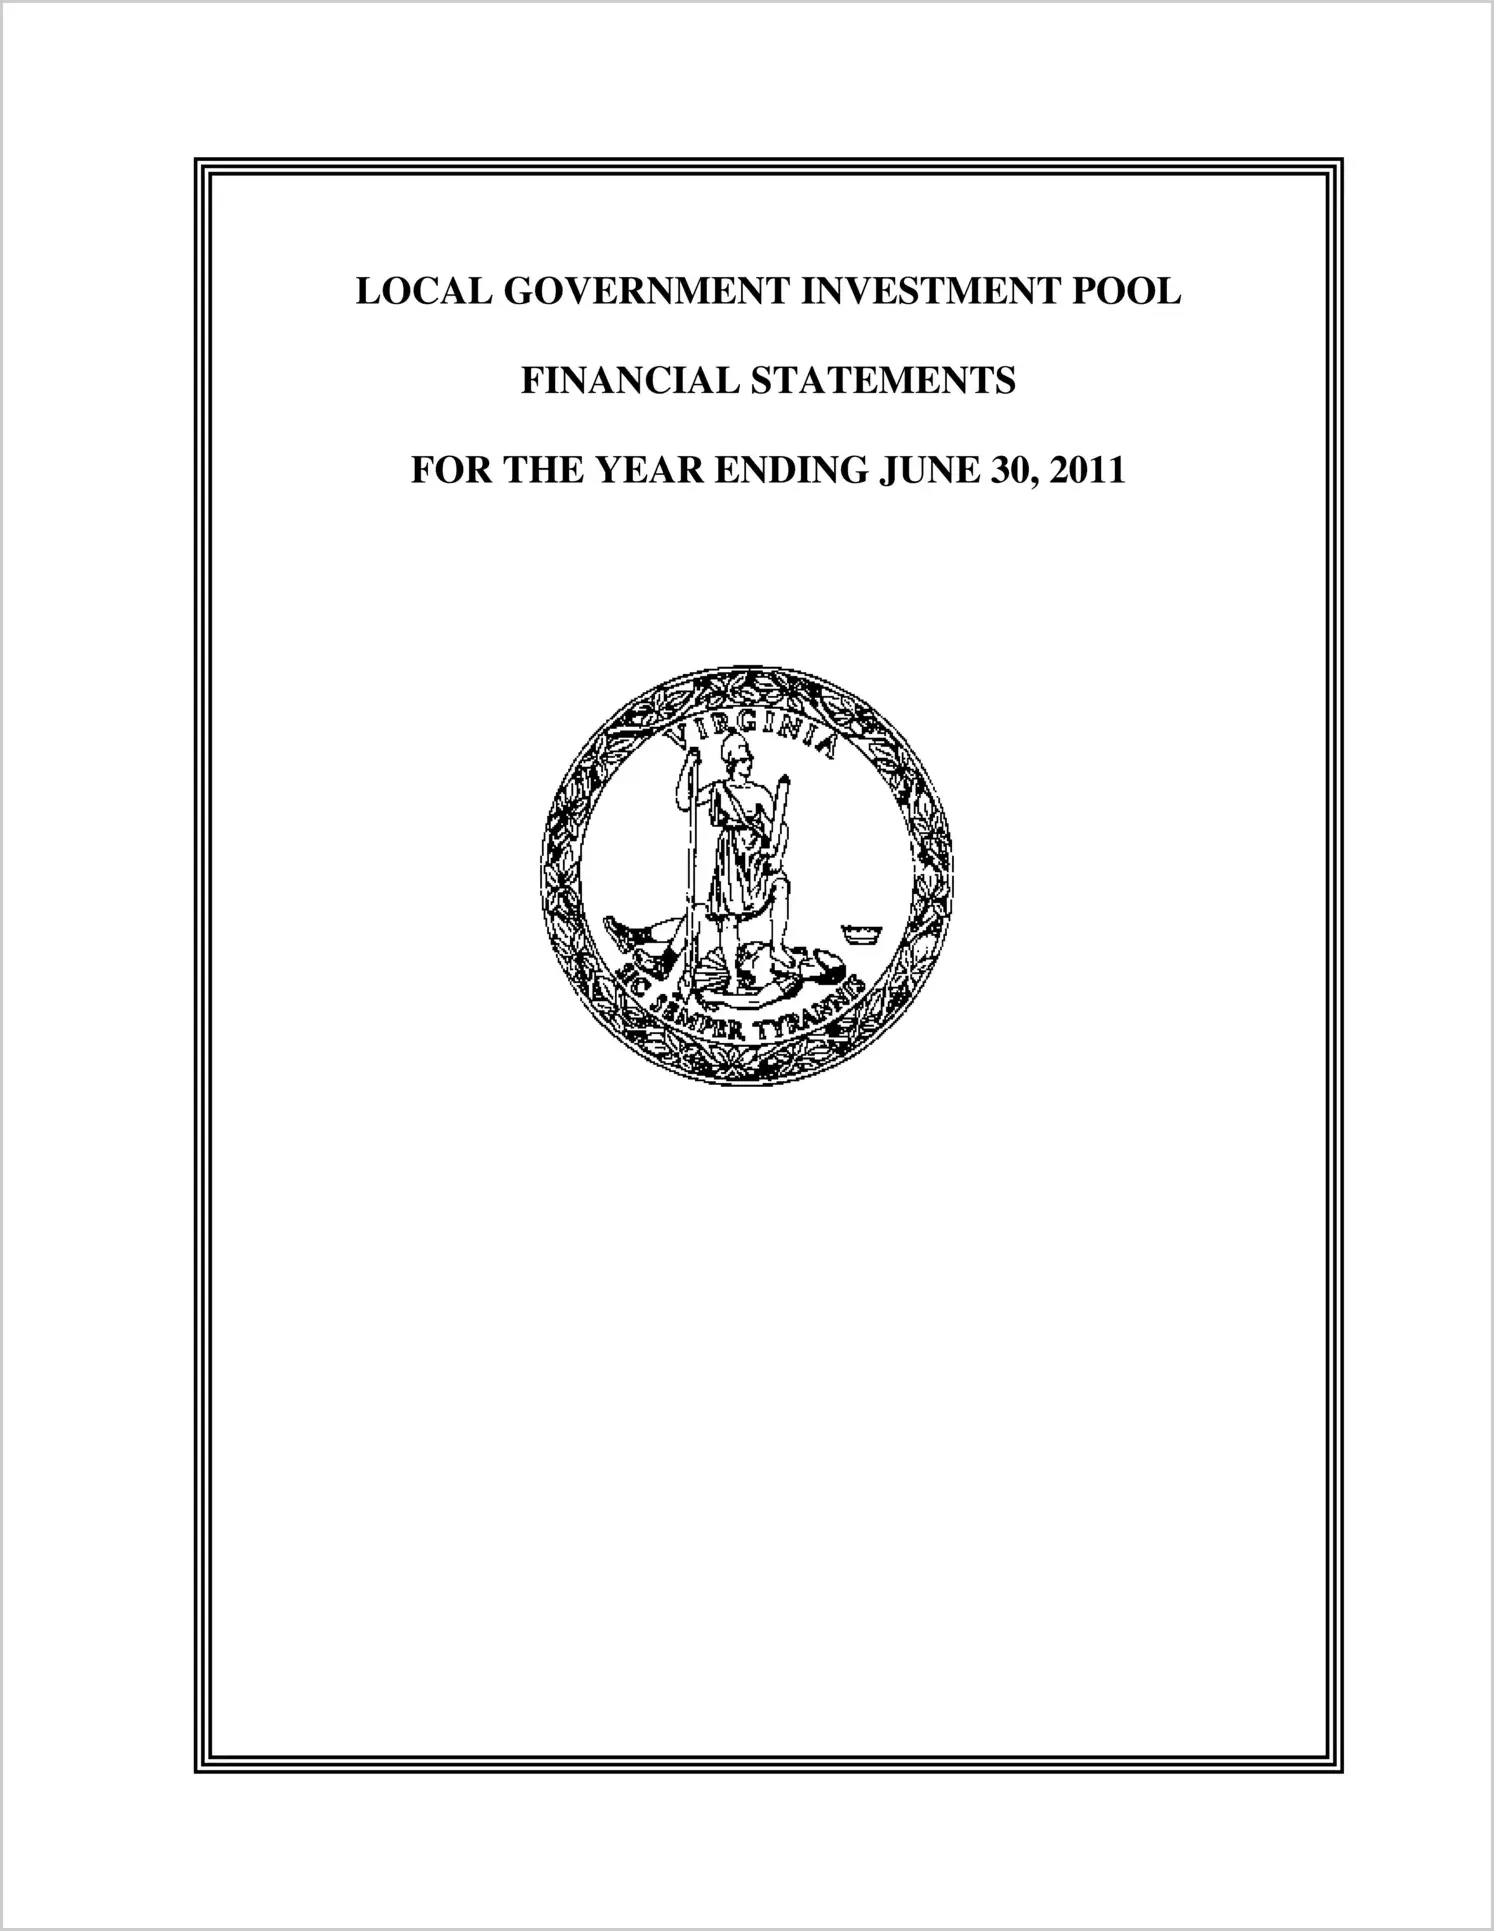 Local Government Investment Pool Financial Statements for the year ended June 30, 2011